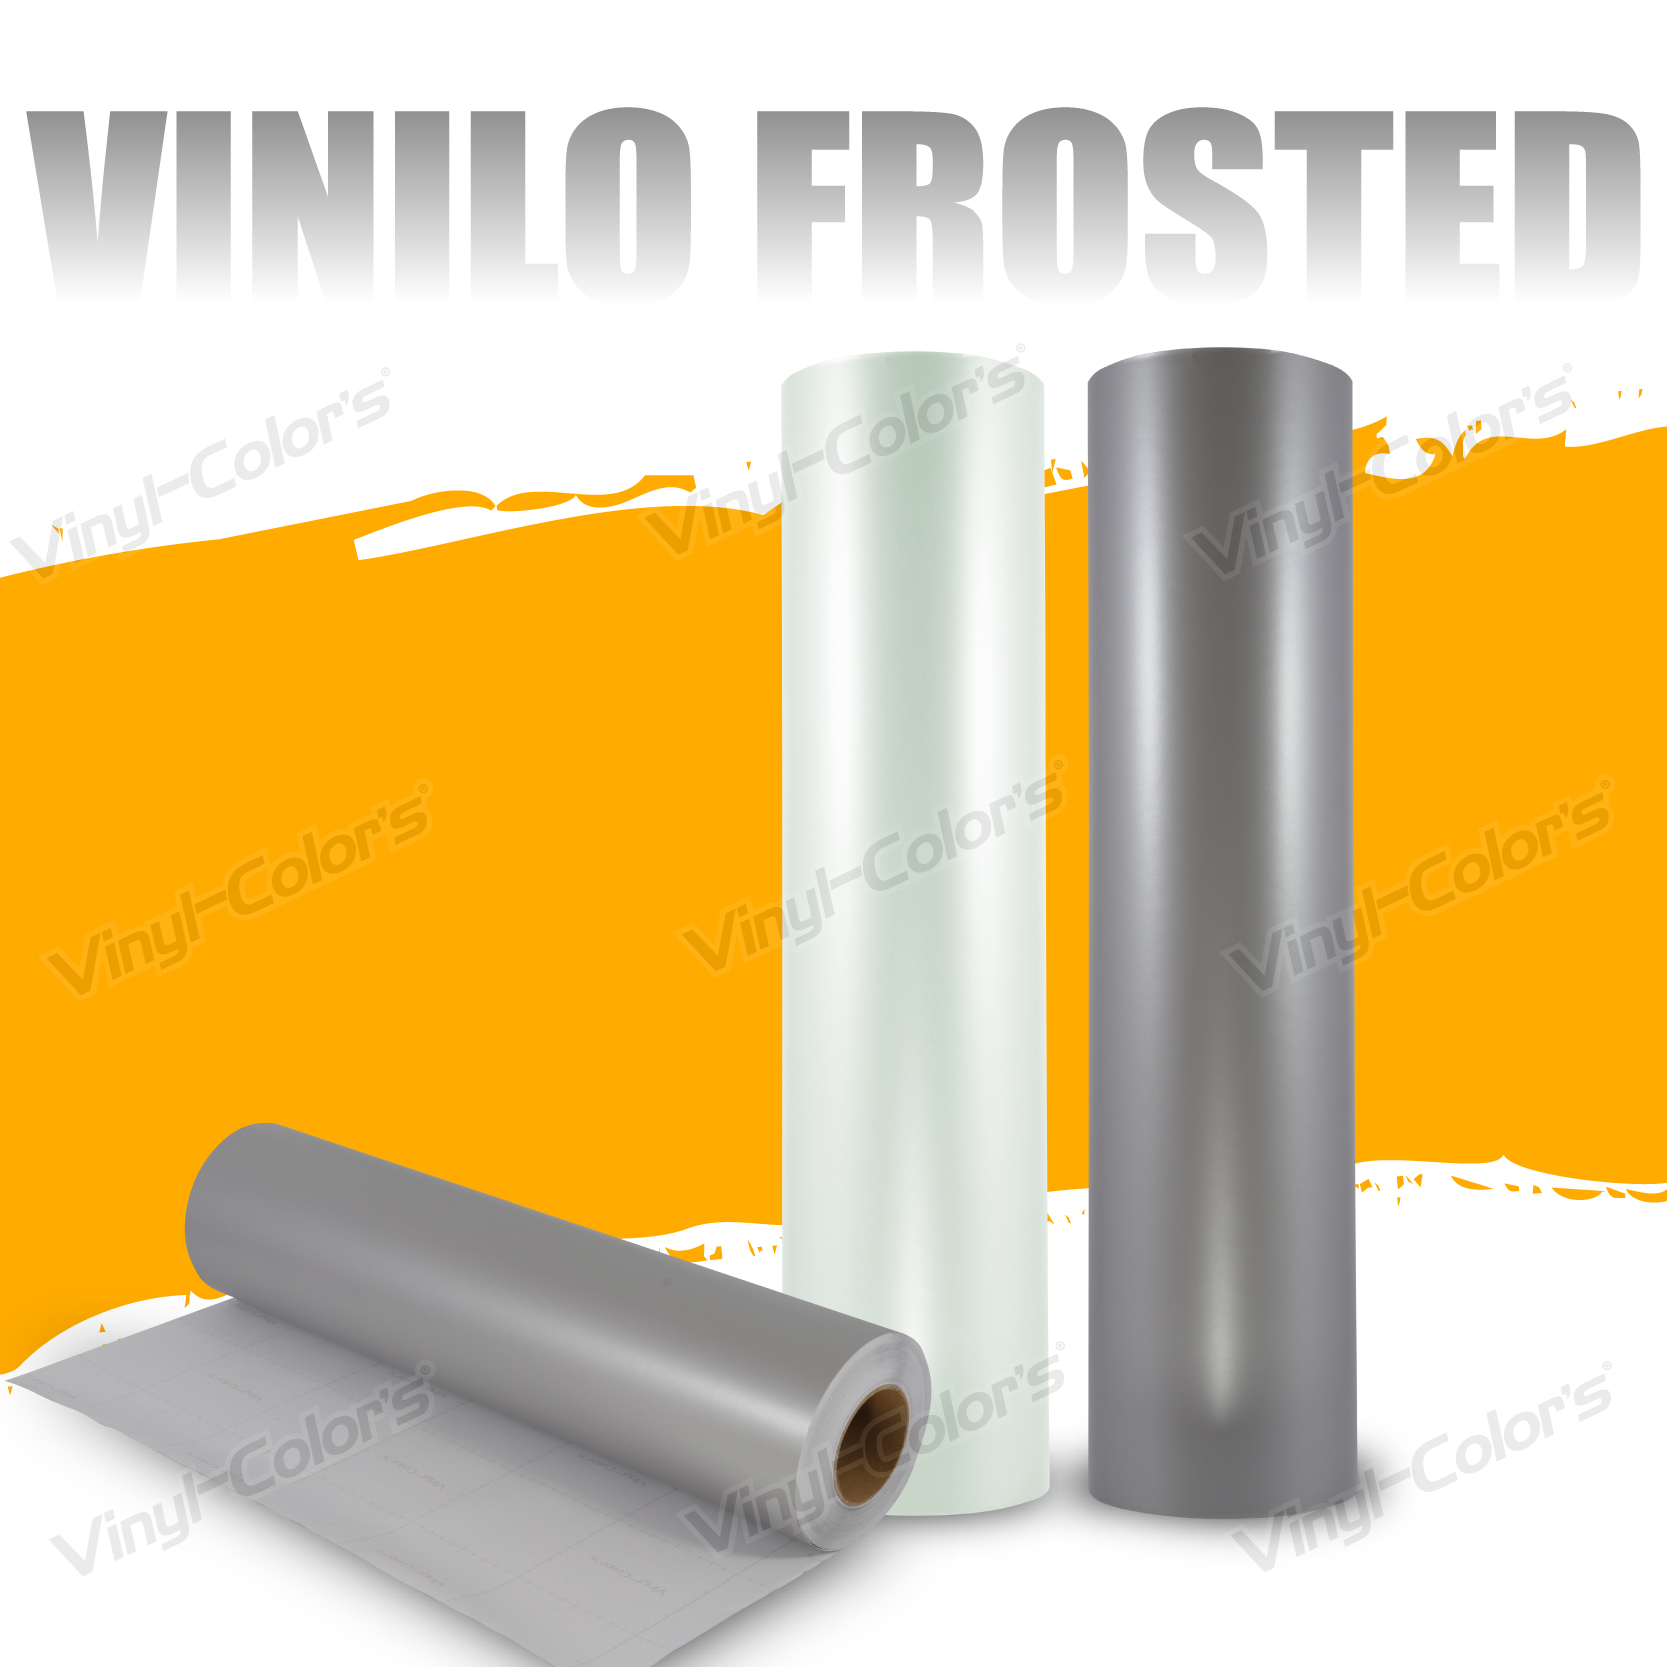 vinilo Frosted